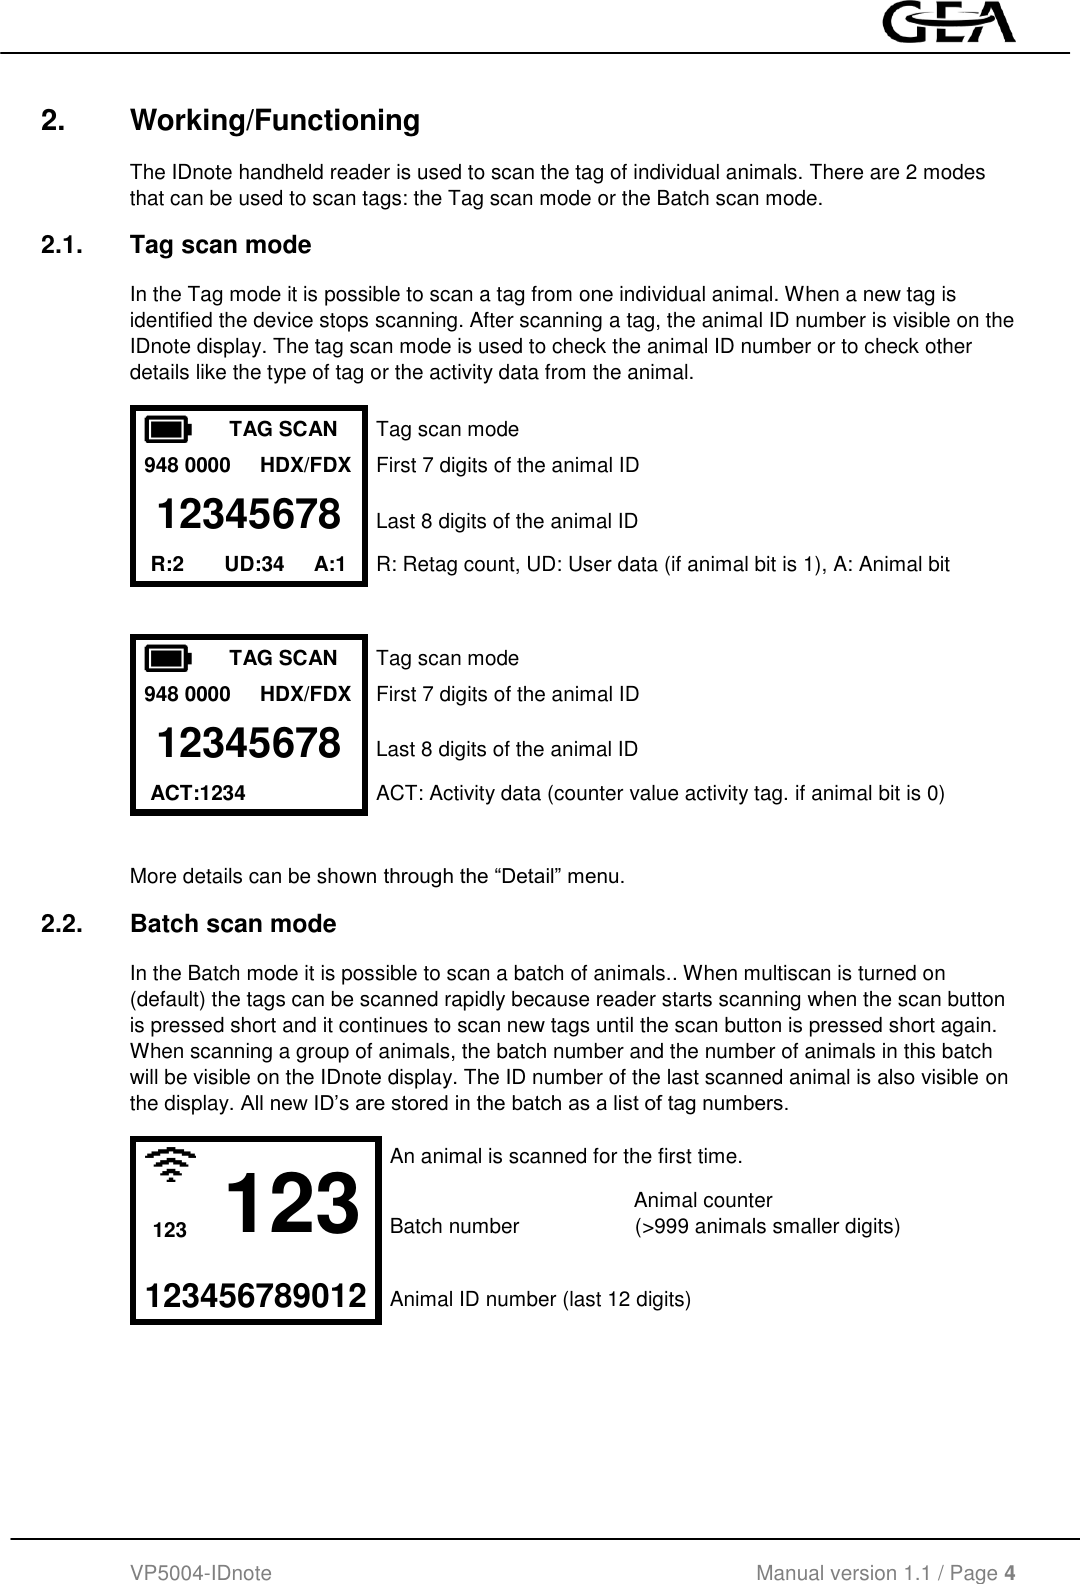  VP5004-IDnote                                             Manual version 1.1 / Page 4  2.  Working/Functioning The IDnote handheld reader is used to scan the tag of individual animals. There are 2 modes that can be used to scan tags: the Tag scan mode or the Batch scan mode. 2.1.  Tag scan mode In the Tag mode it is possible to scan a tag from one individual animal. When a new tag is identified the device stops scanning. After scanning a tag, the animal ID number is visible on the IDnote display. The tag scan mode is used to check the animal ID number or to check other details like the type of tag or the activity data from the animal.  TAG SCAN Tag scan mode 948 0000     HDX/FDX First 7 digits of the animal ID 12345678 Last 8 digits of the animal ID R:2       UD:34     A:1       R: Retag count, UD: User data (if animal bit is 1), A: Animal bit    TAG SCAN Tag scan mode 948 0000     HDX/FDX First 7 digits of the animal ID 12345678 Last 8 digits of the animal ID  ACT:1234  ACT: Activity data (counter value activity tag. if animal bit is 0)   More details can be shown through the “Detail” menu. 2.2.  Batch scan mode In the Batch mode it is possible to scan a batch of animals.. When multiscan is turned on (default) the tags can be scanned rapidly because reader starts scanning when the scan button is pressed short and it continues to scan new tags until the scan button is pressed short again. When scanning a group of animals, the batch number and the number of animals in this batch will be visible on the IDnote display. The ID number of the last scanned animal is also visible on the display. All new ID’s are stored in the batch as a list of tag numbers.  123 An animal is scanned for the first time.            Animal counter 123 Batch number                    (&gt;999 animals smaller digits)   123456789012 Animal ID number (last 12 digits)   